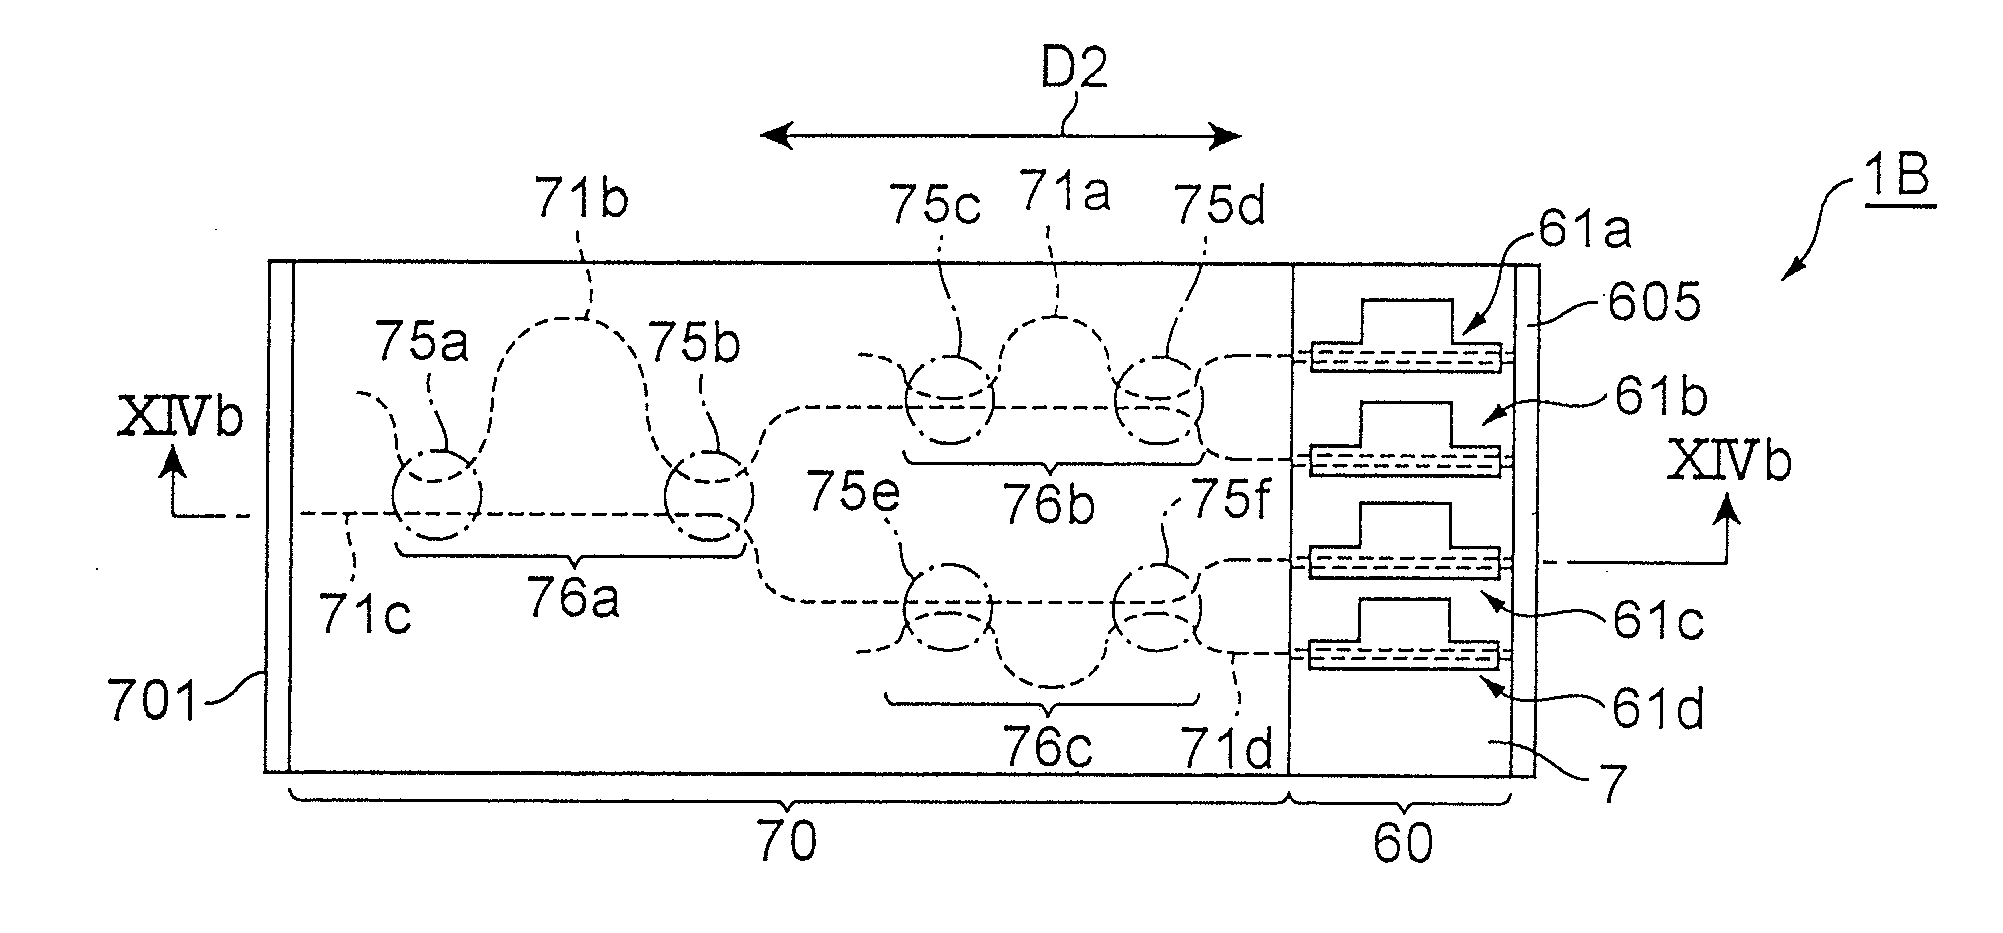 Semiconductor integrated optical device and method of making the same